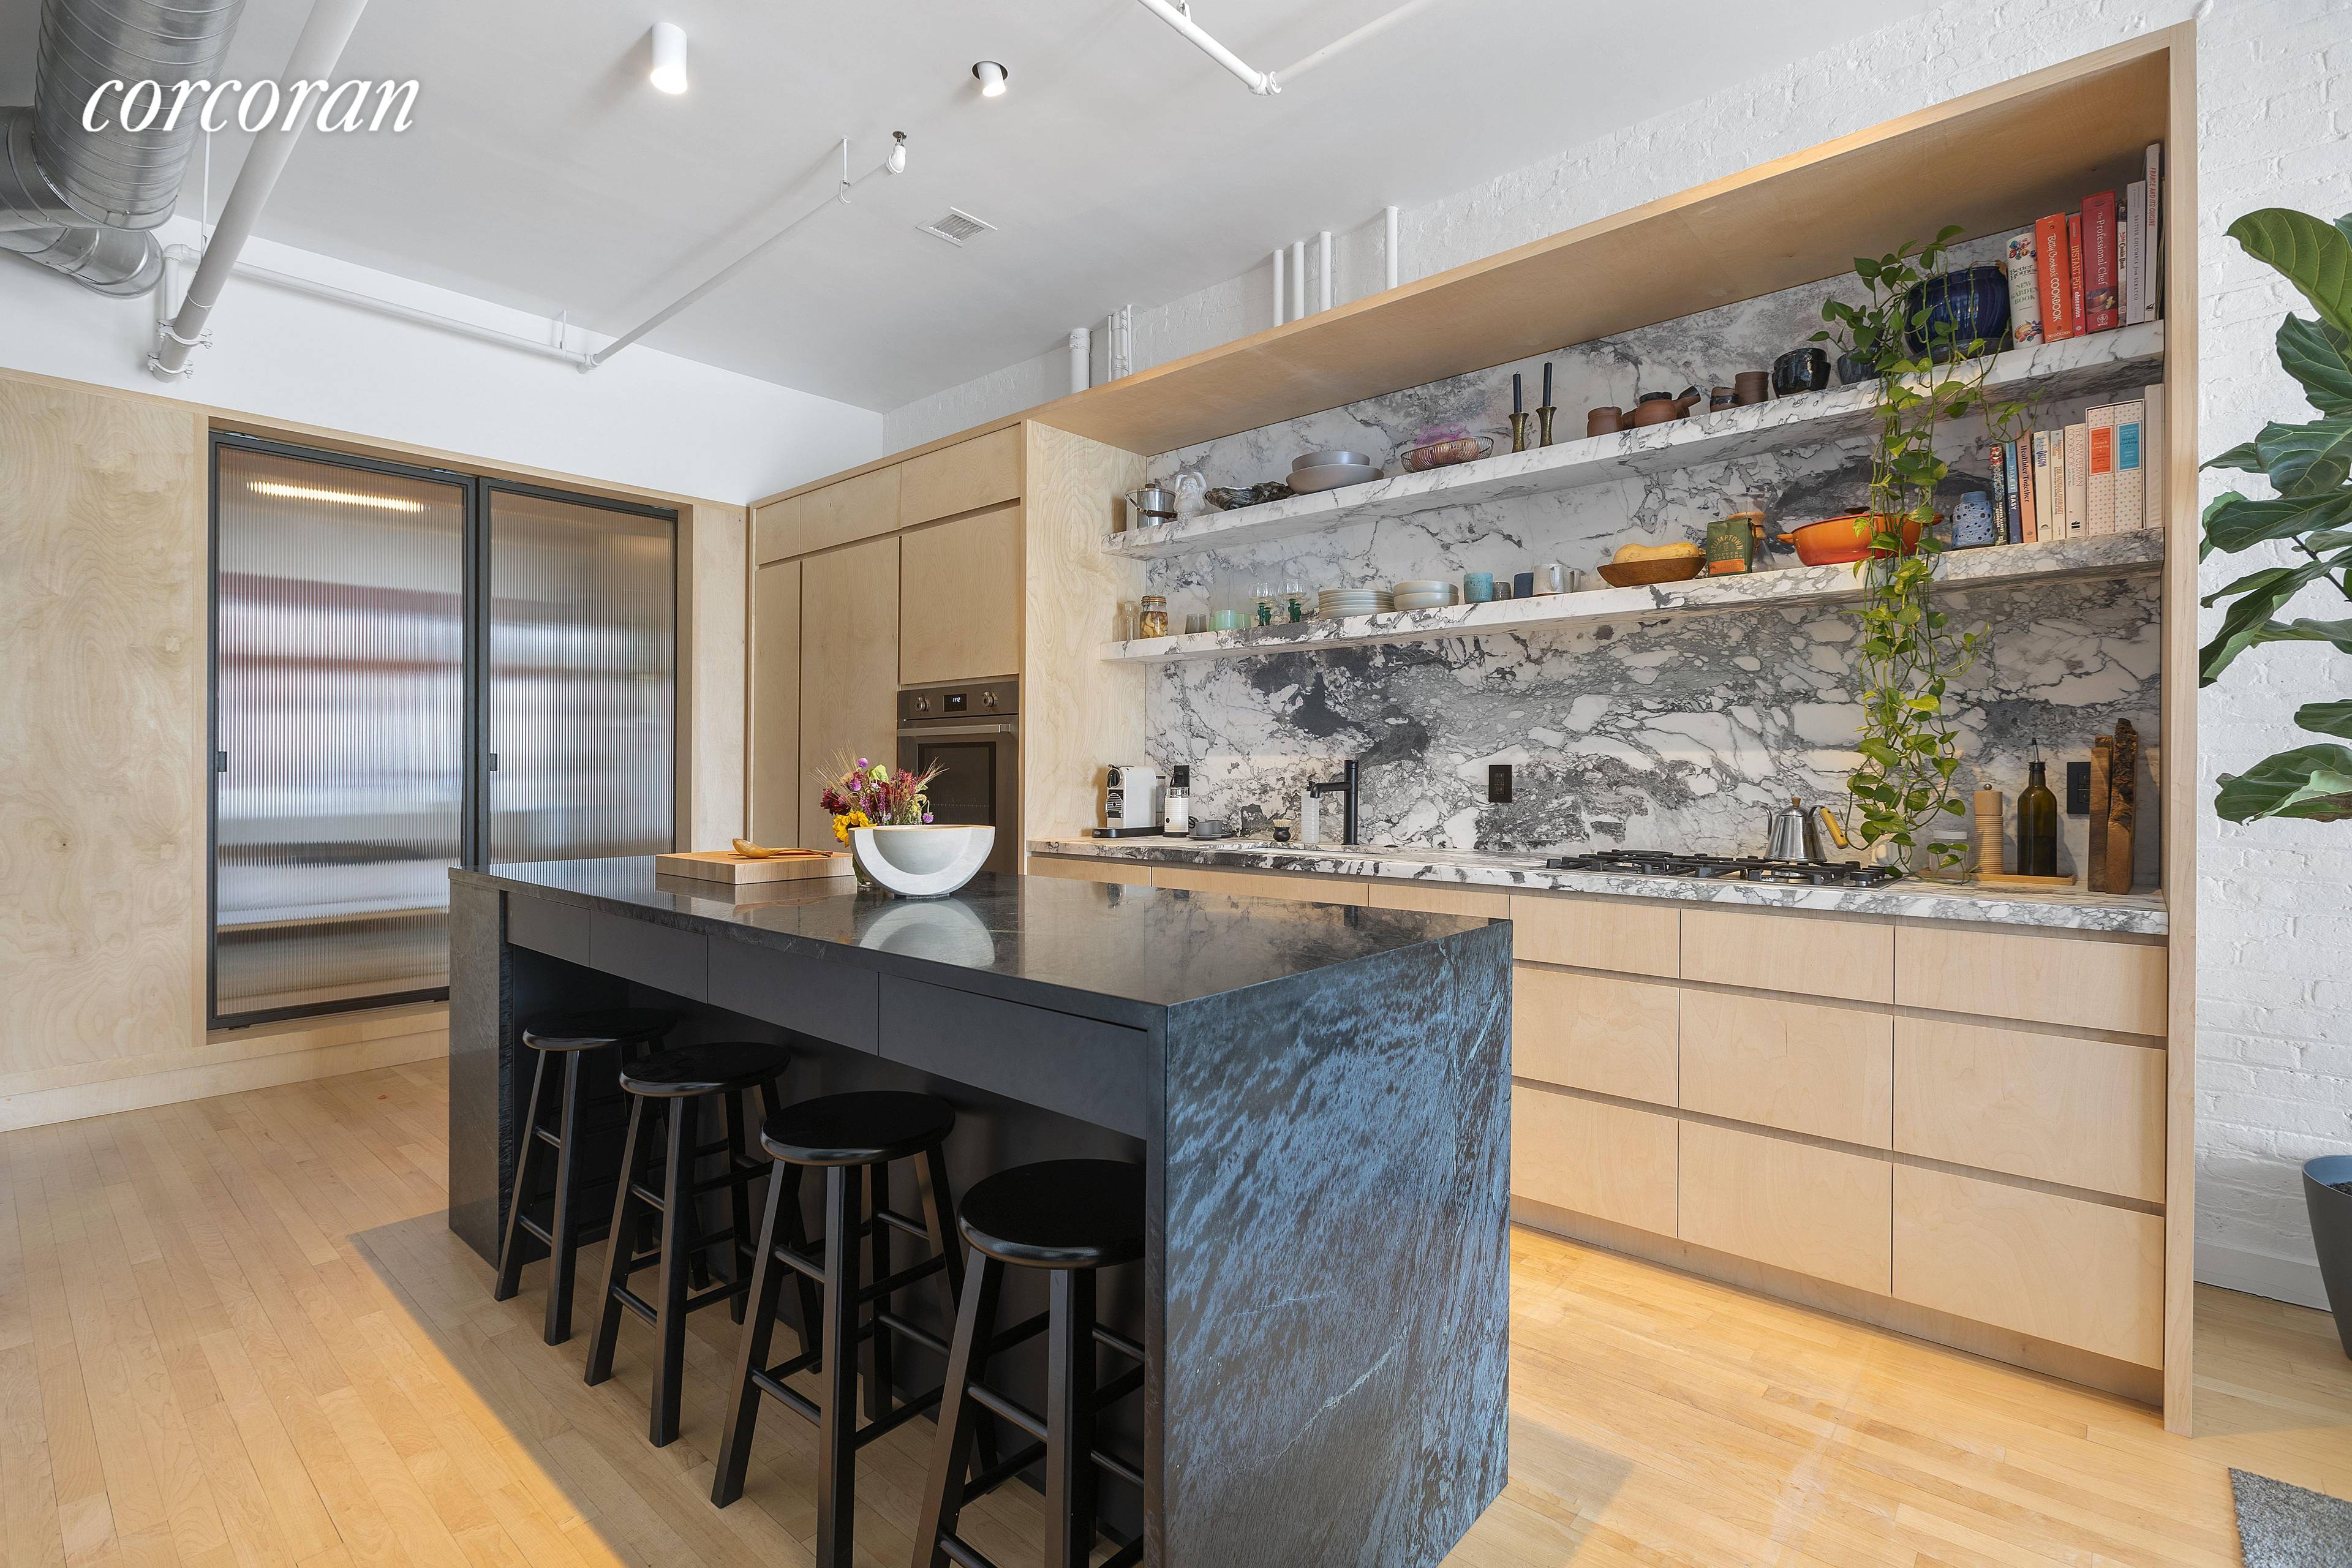 Space, style and sophistication come together in this truly stunning 916 sqft condo LOFT with separate BEDROOM in Clinton Hill.